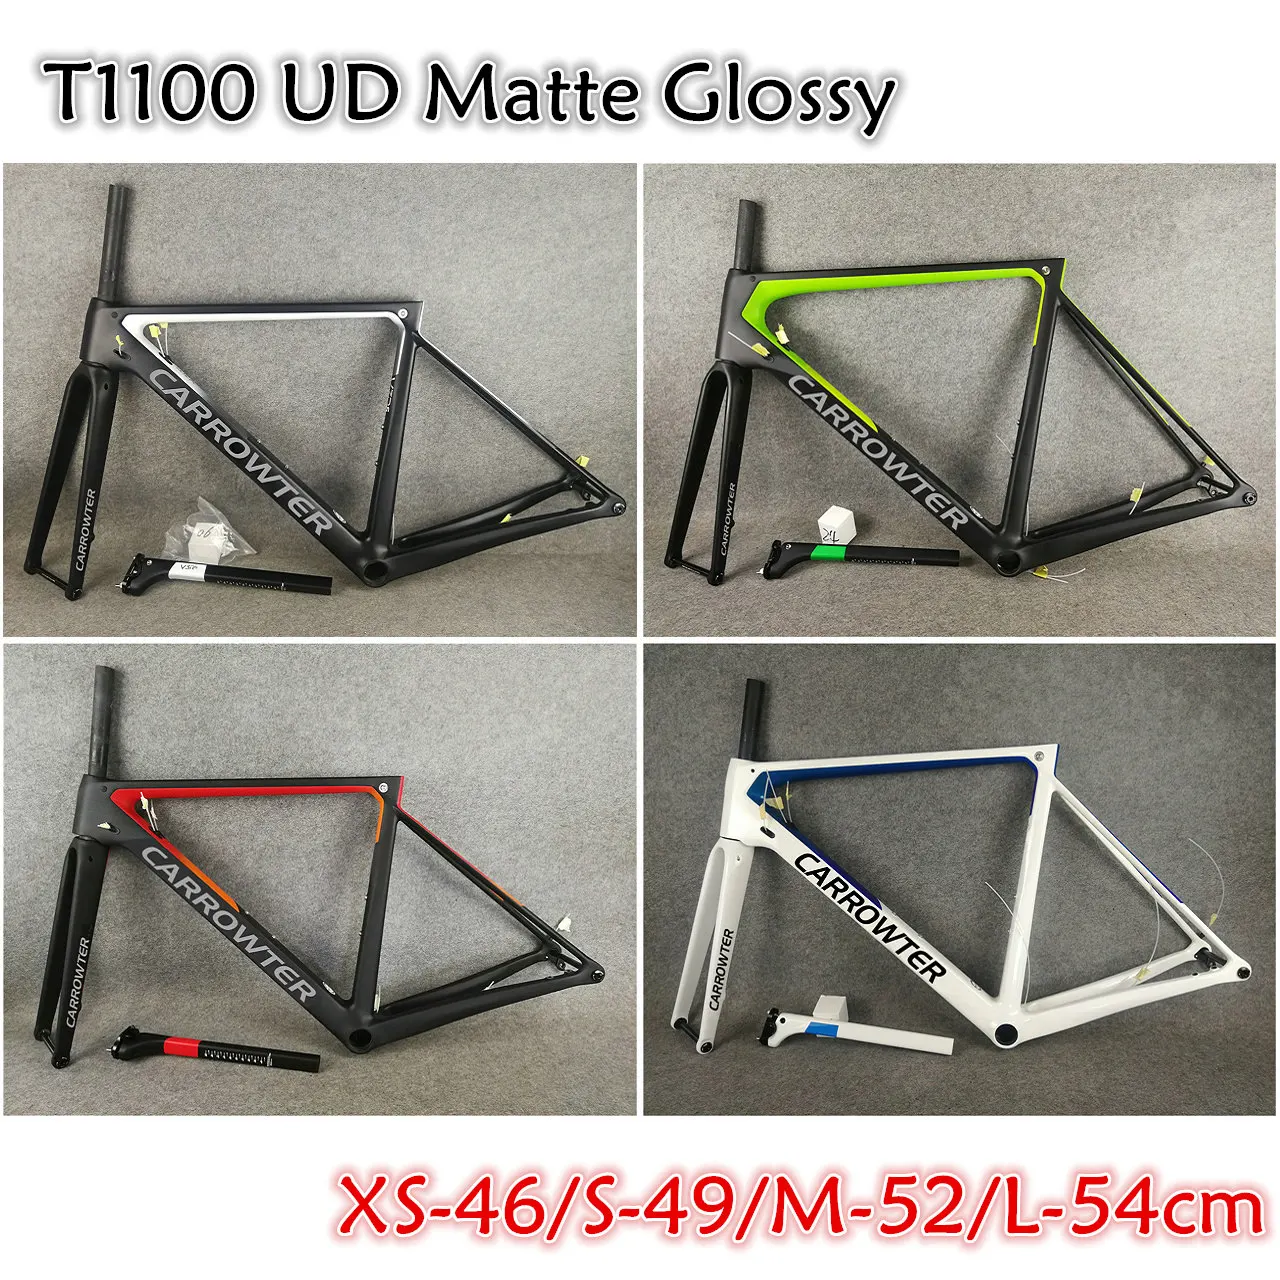 

CARROWTER V3Rs Disc carbon Road Bike Frames T1100 UD Matte Glossy Disk Bicycle Frameset with 46 49 52 54cm for Your Selection